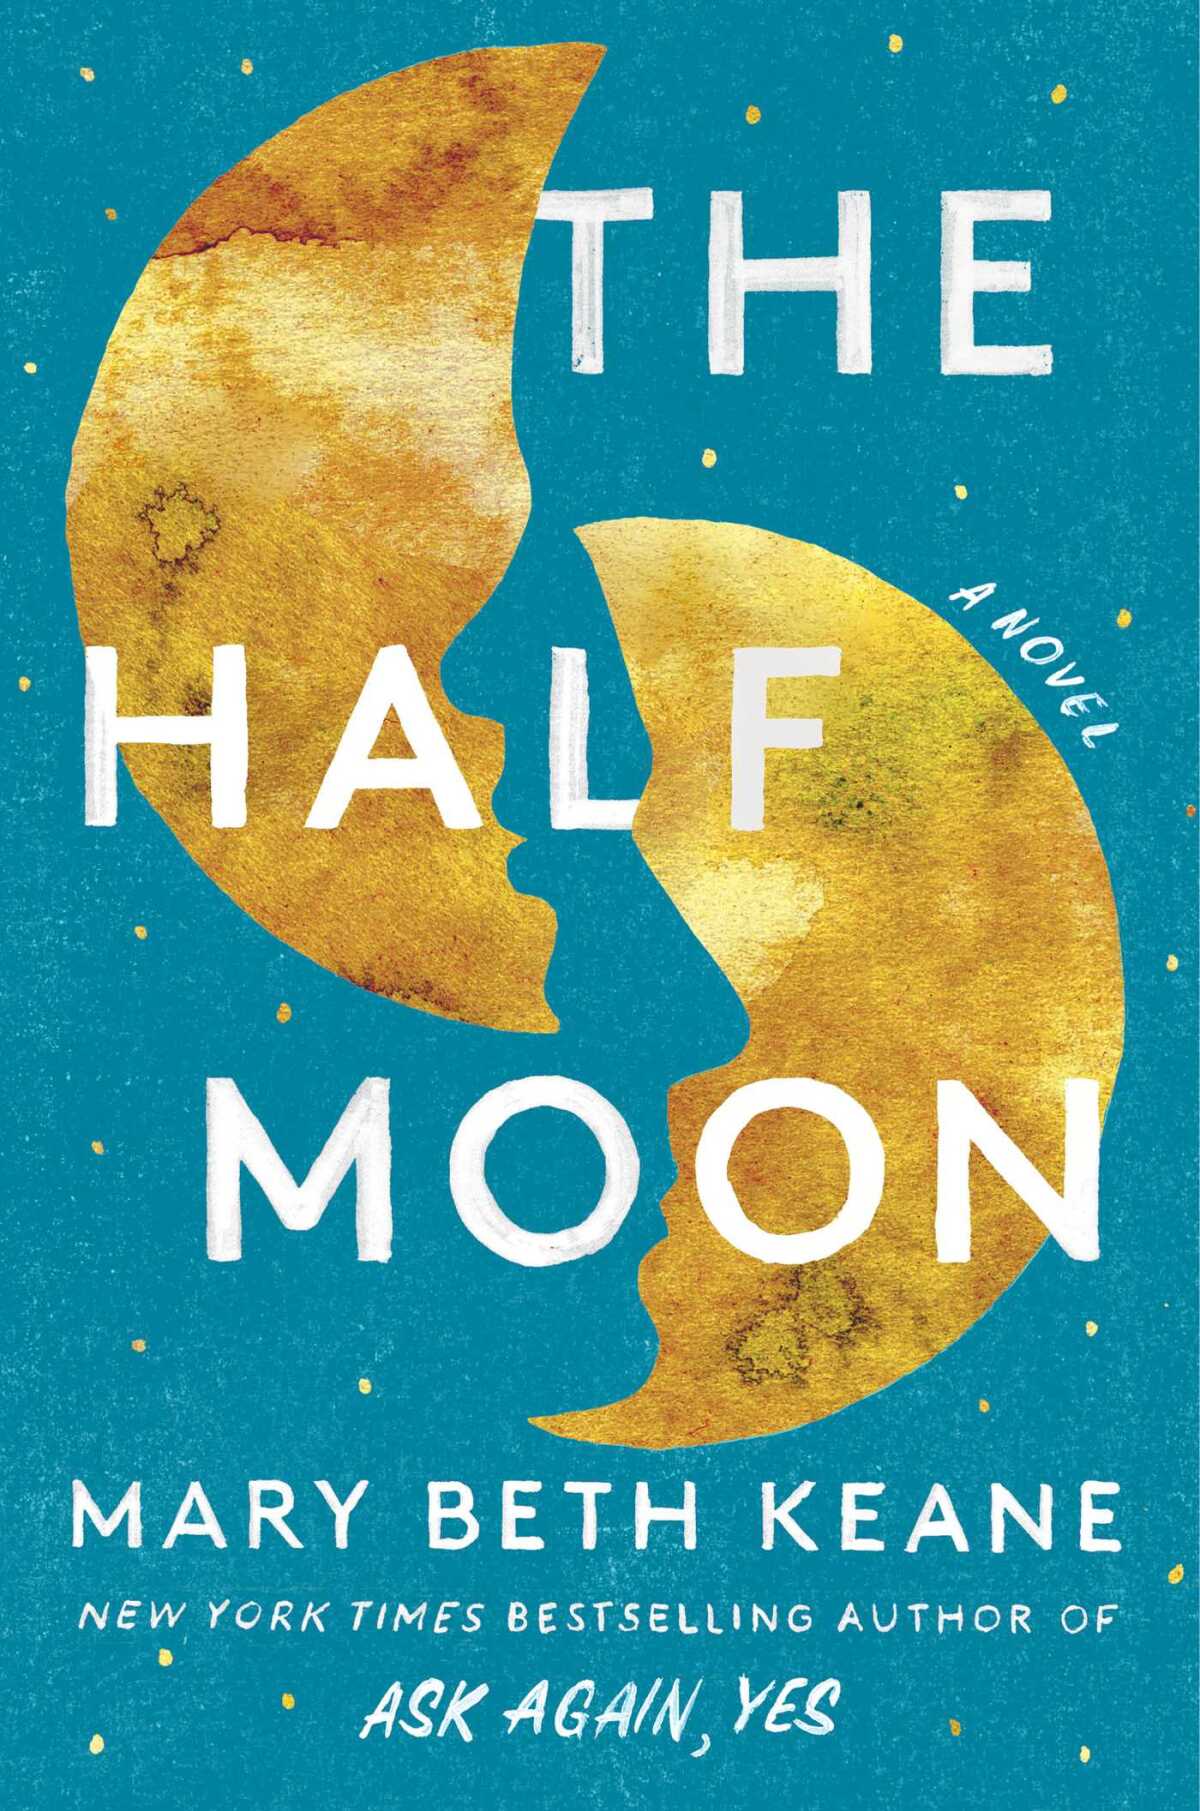 book cover 'The Half Moon,' by Mary Beth Keane has a moon split in half